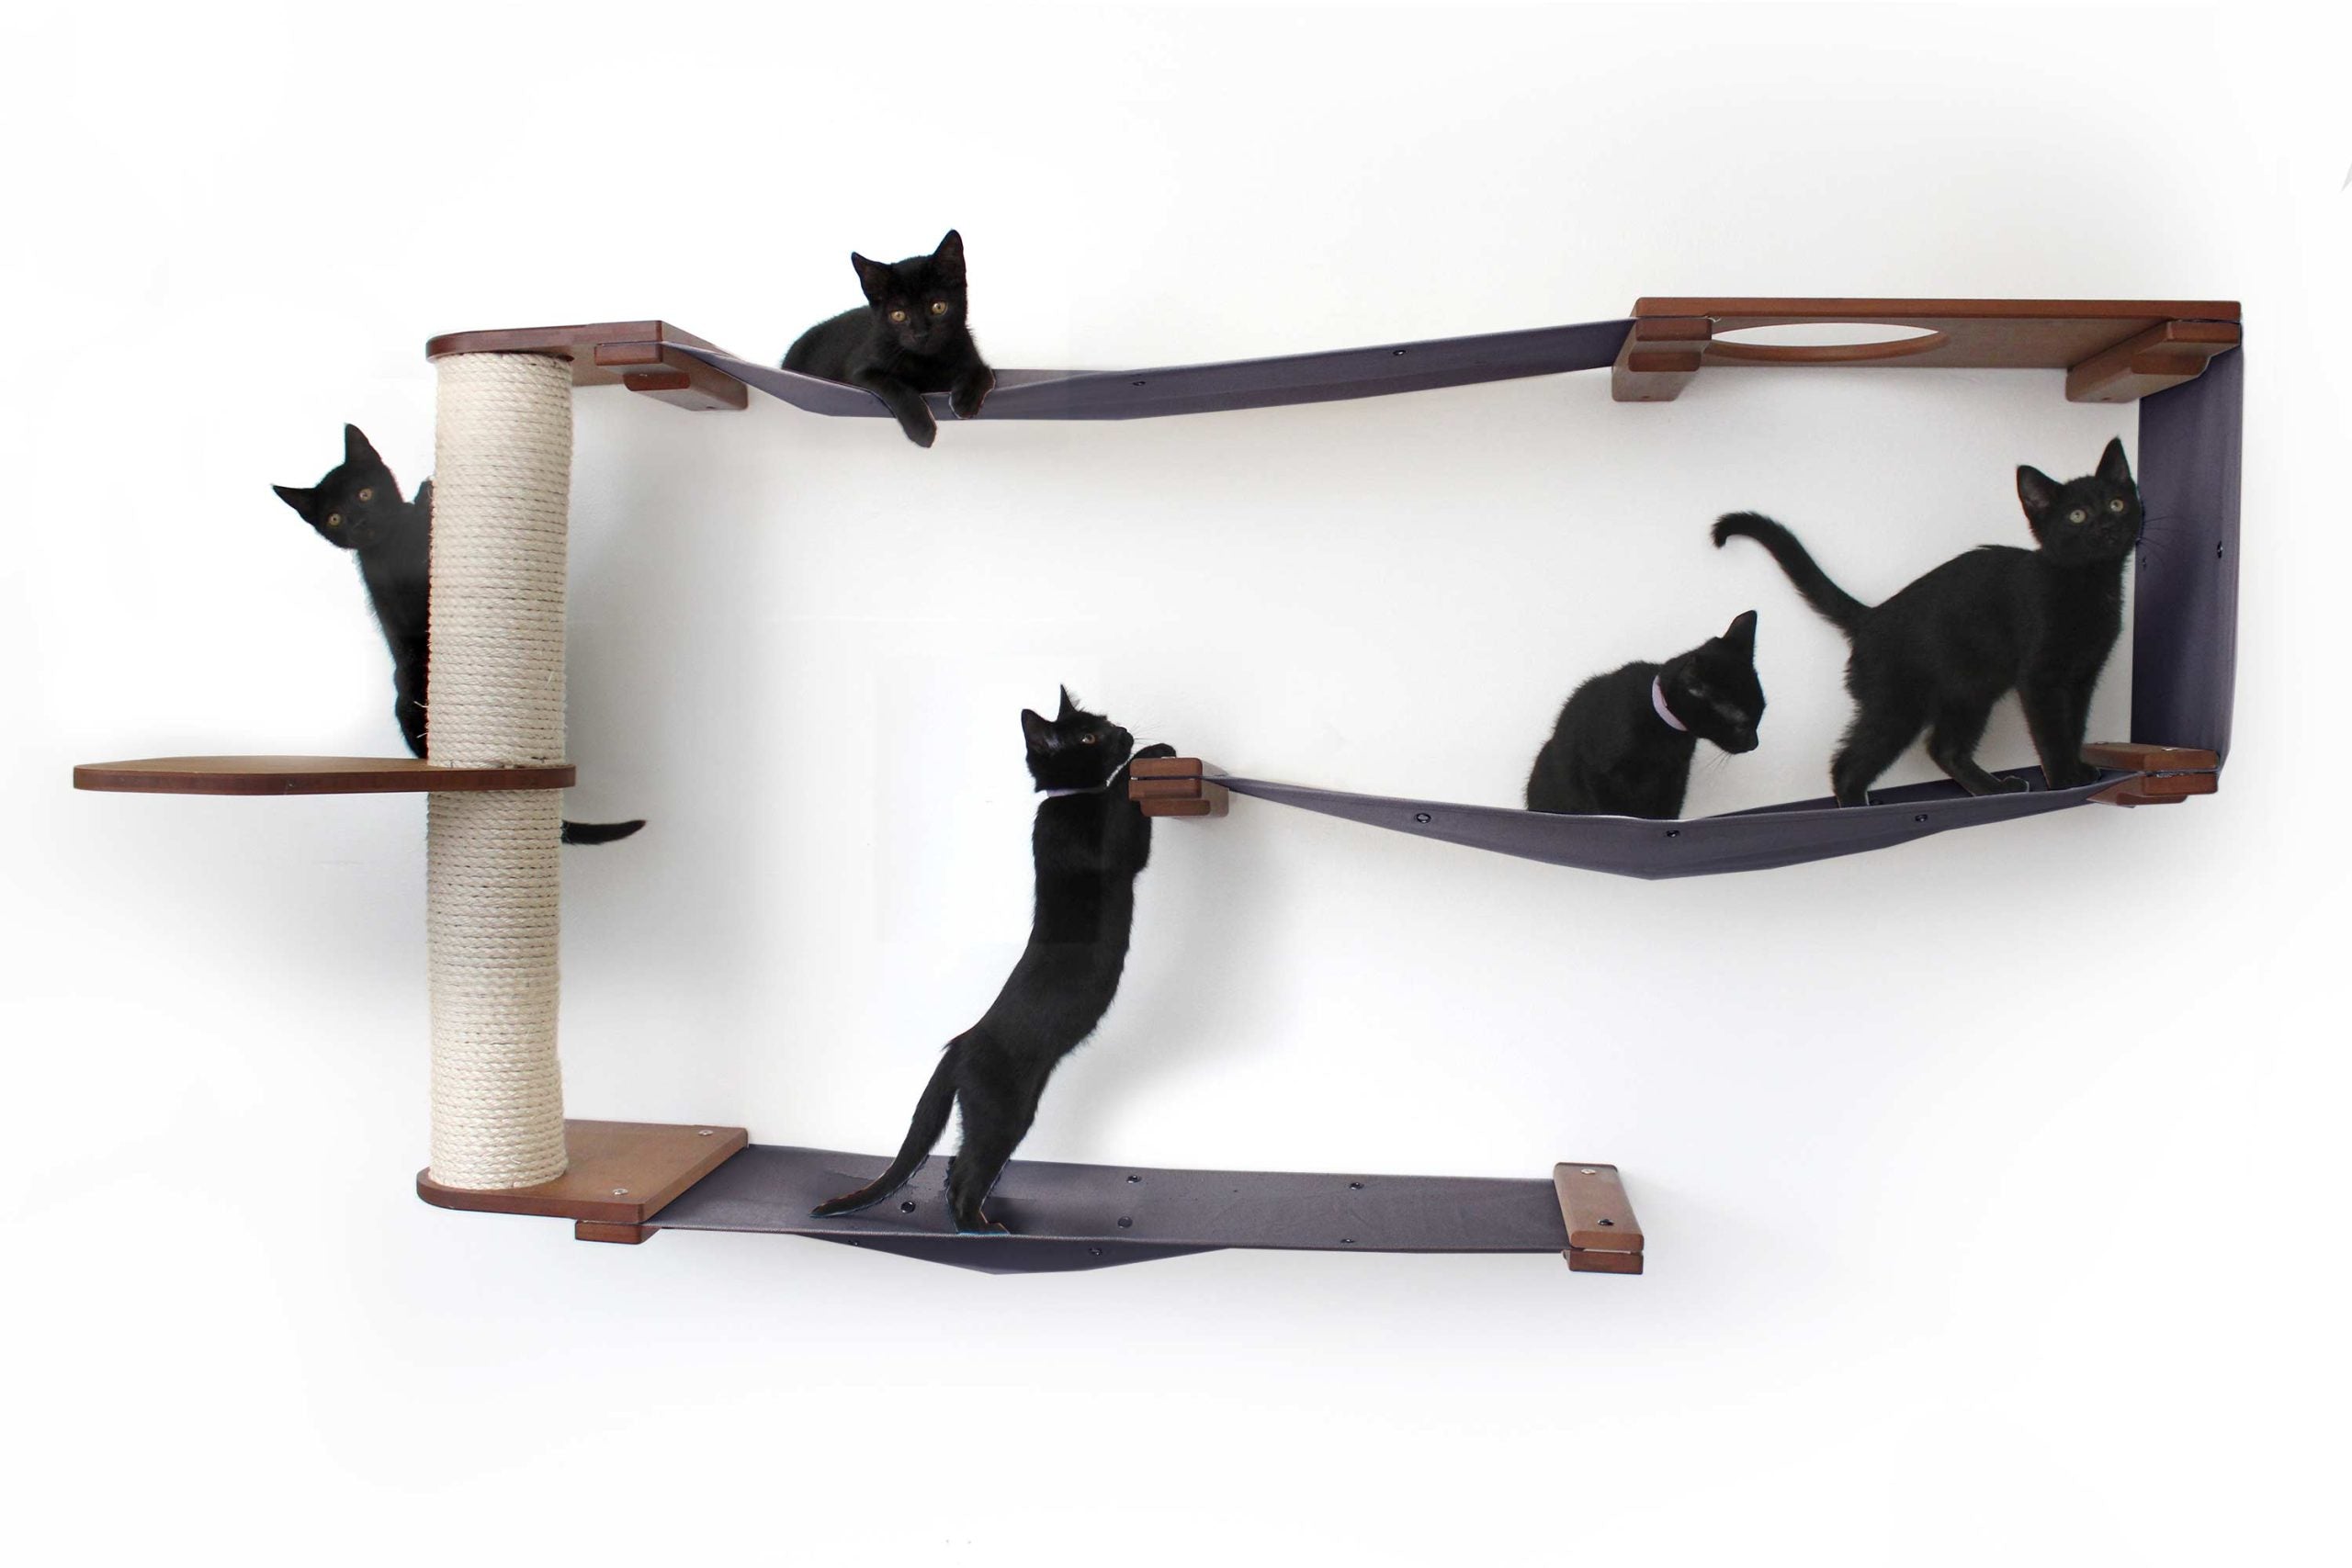 Cats playing on the English Chestnut/Charcoal Deluxe Maze with Leaf Shelf